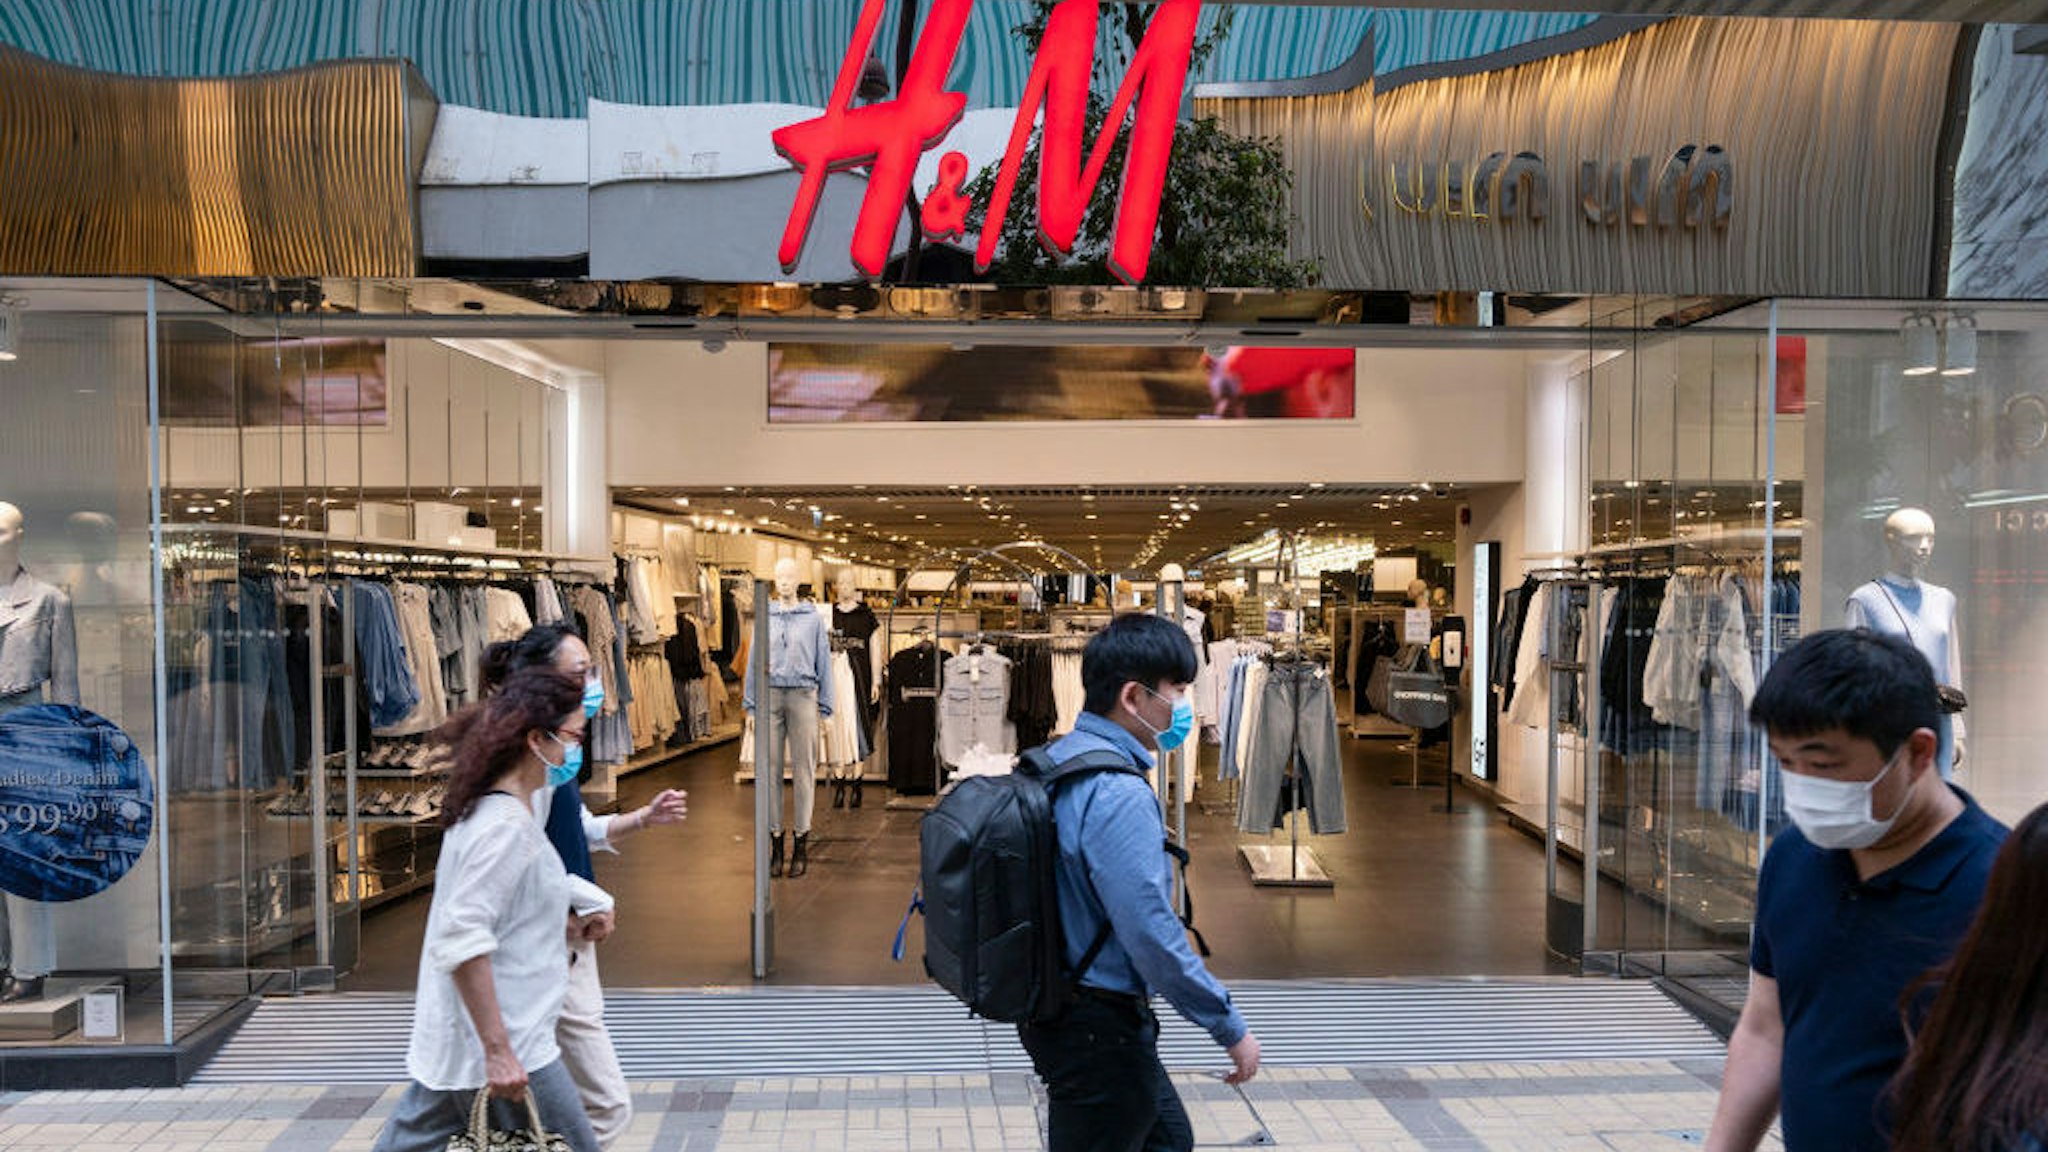 HONG KONG, CHINA - 2021/03/15: Pedestrians walk past the Swedish multinational clothing design retail company Hennes &amp; Mauritz, H&amp;M, store in Hong Kong. (Photo by Budrul Chukrut/SOPA Images/LightRocket via Getty Images)